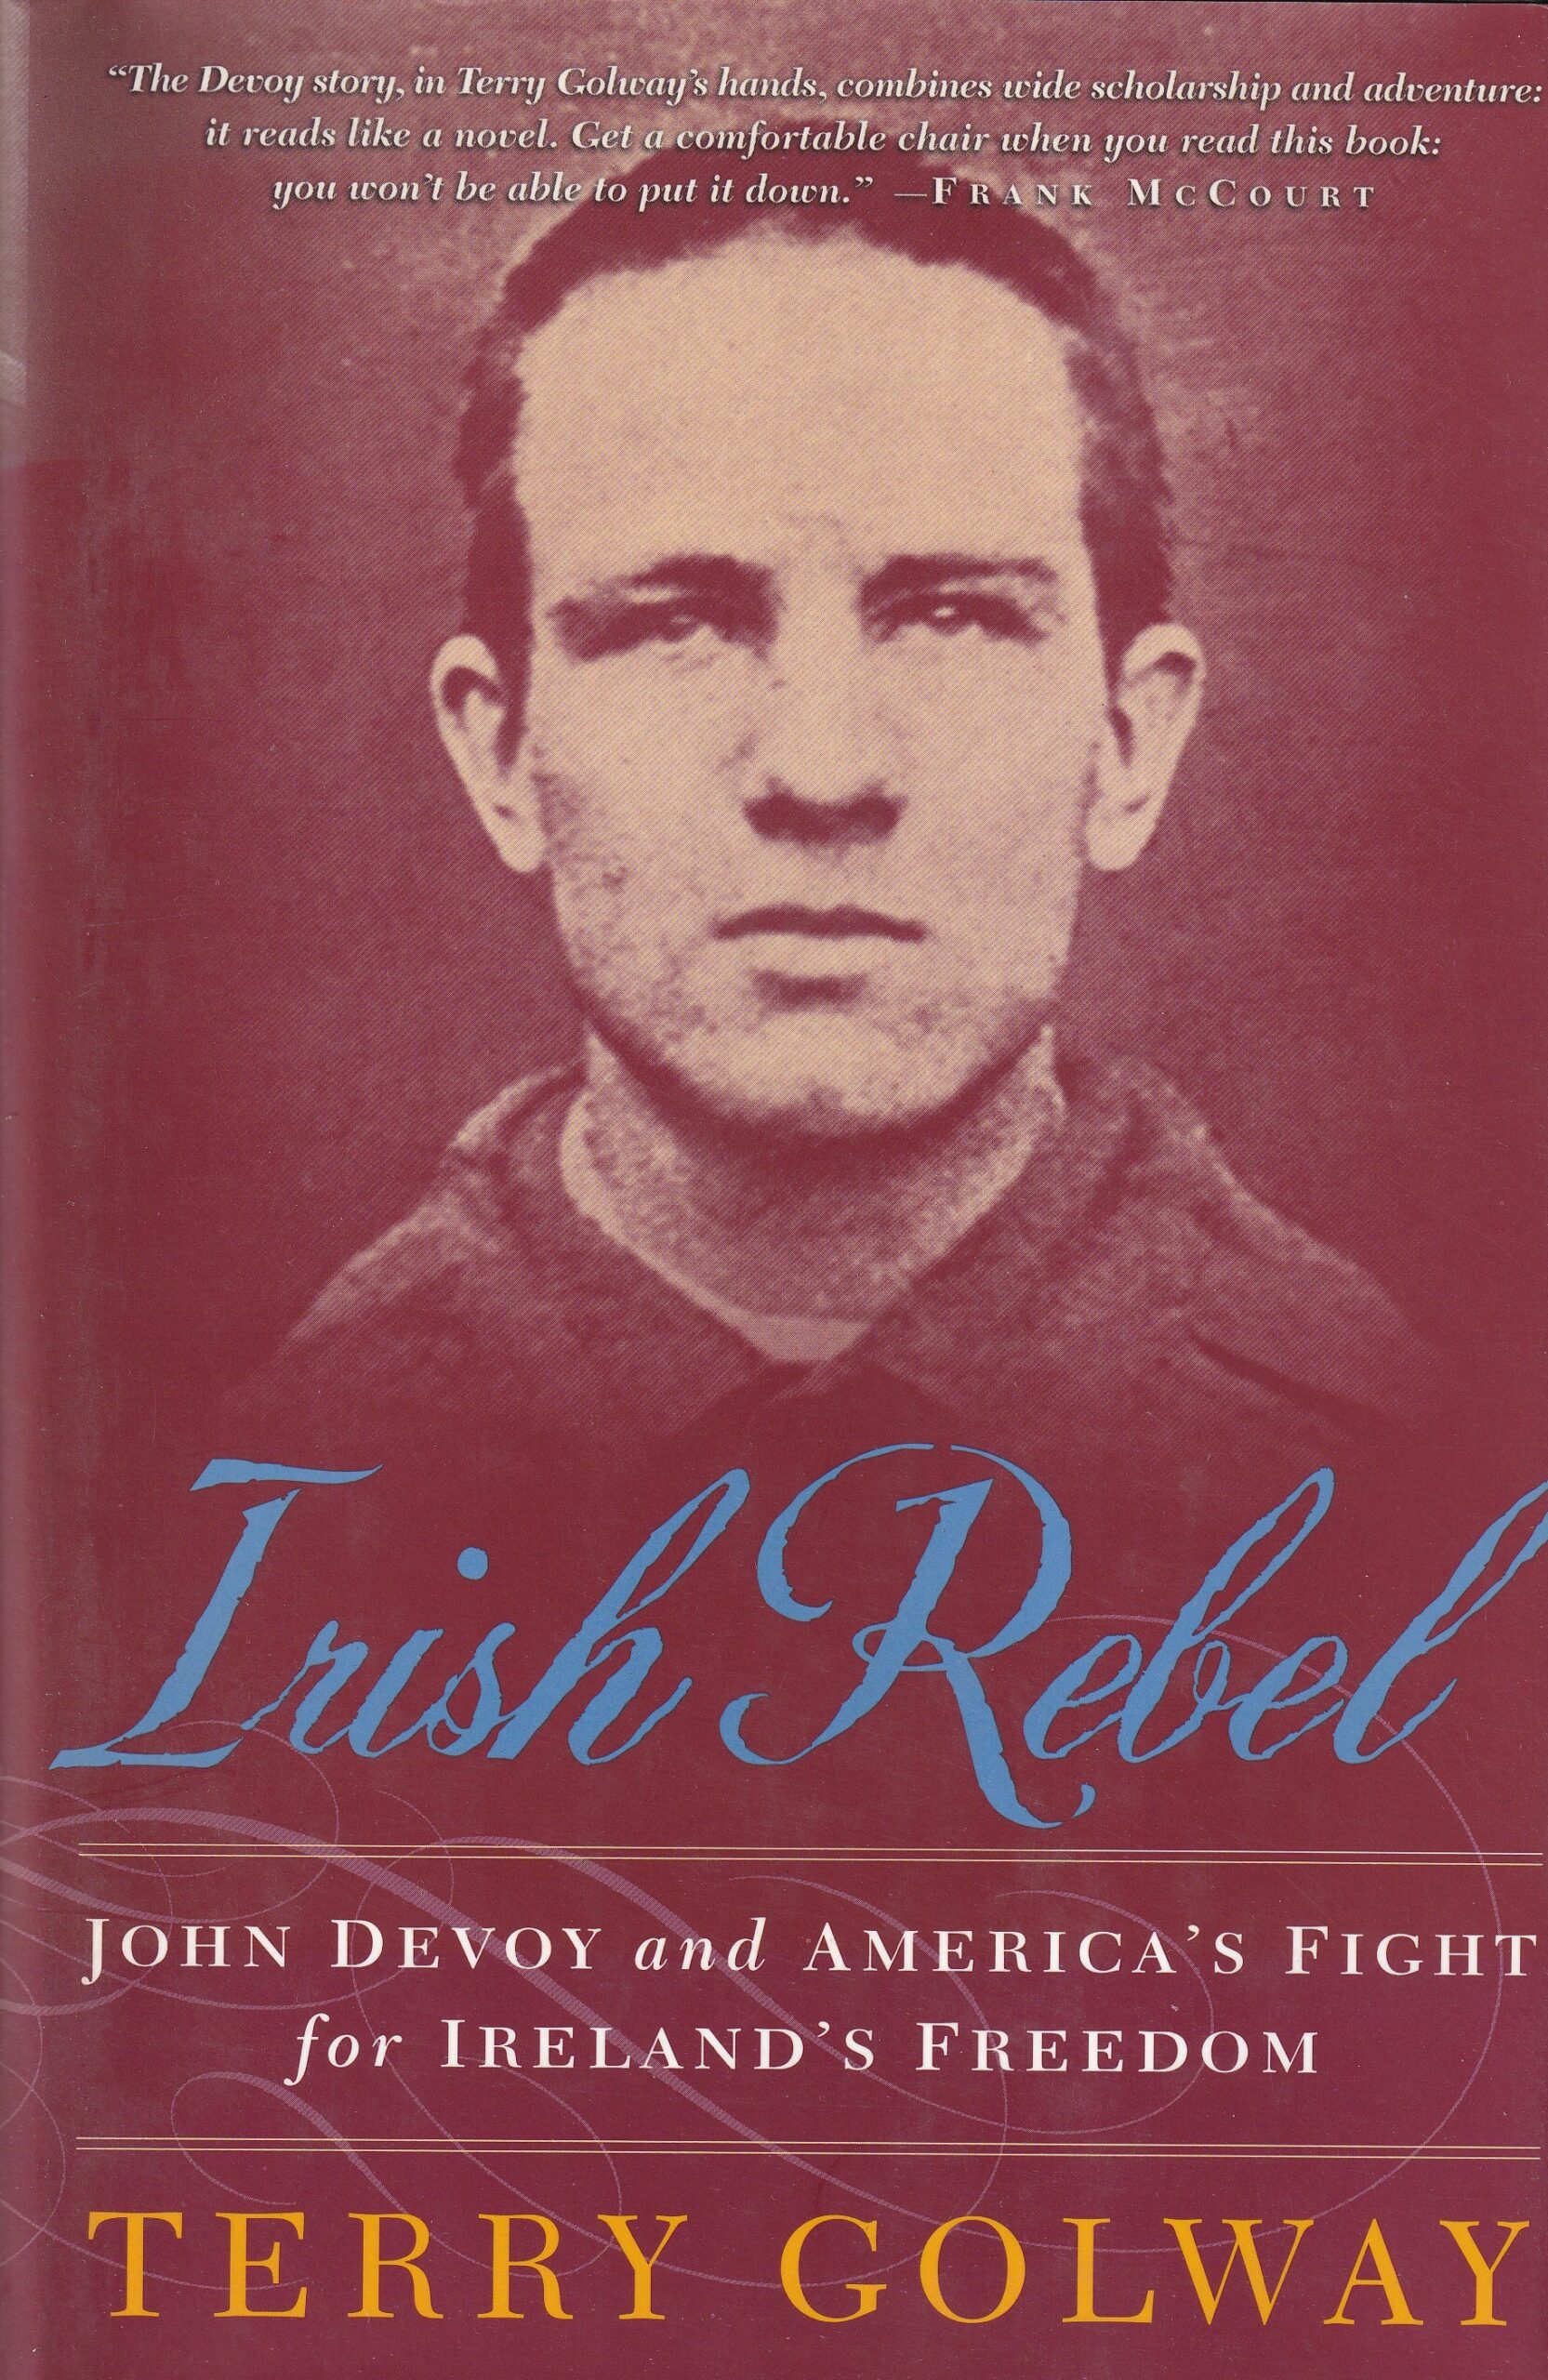 Irish Rebel: John Devoy and America’s Fight for Ireland’s Freedom by Terry Golway